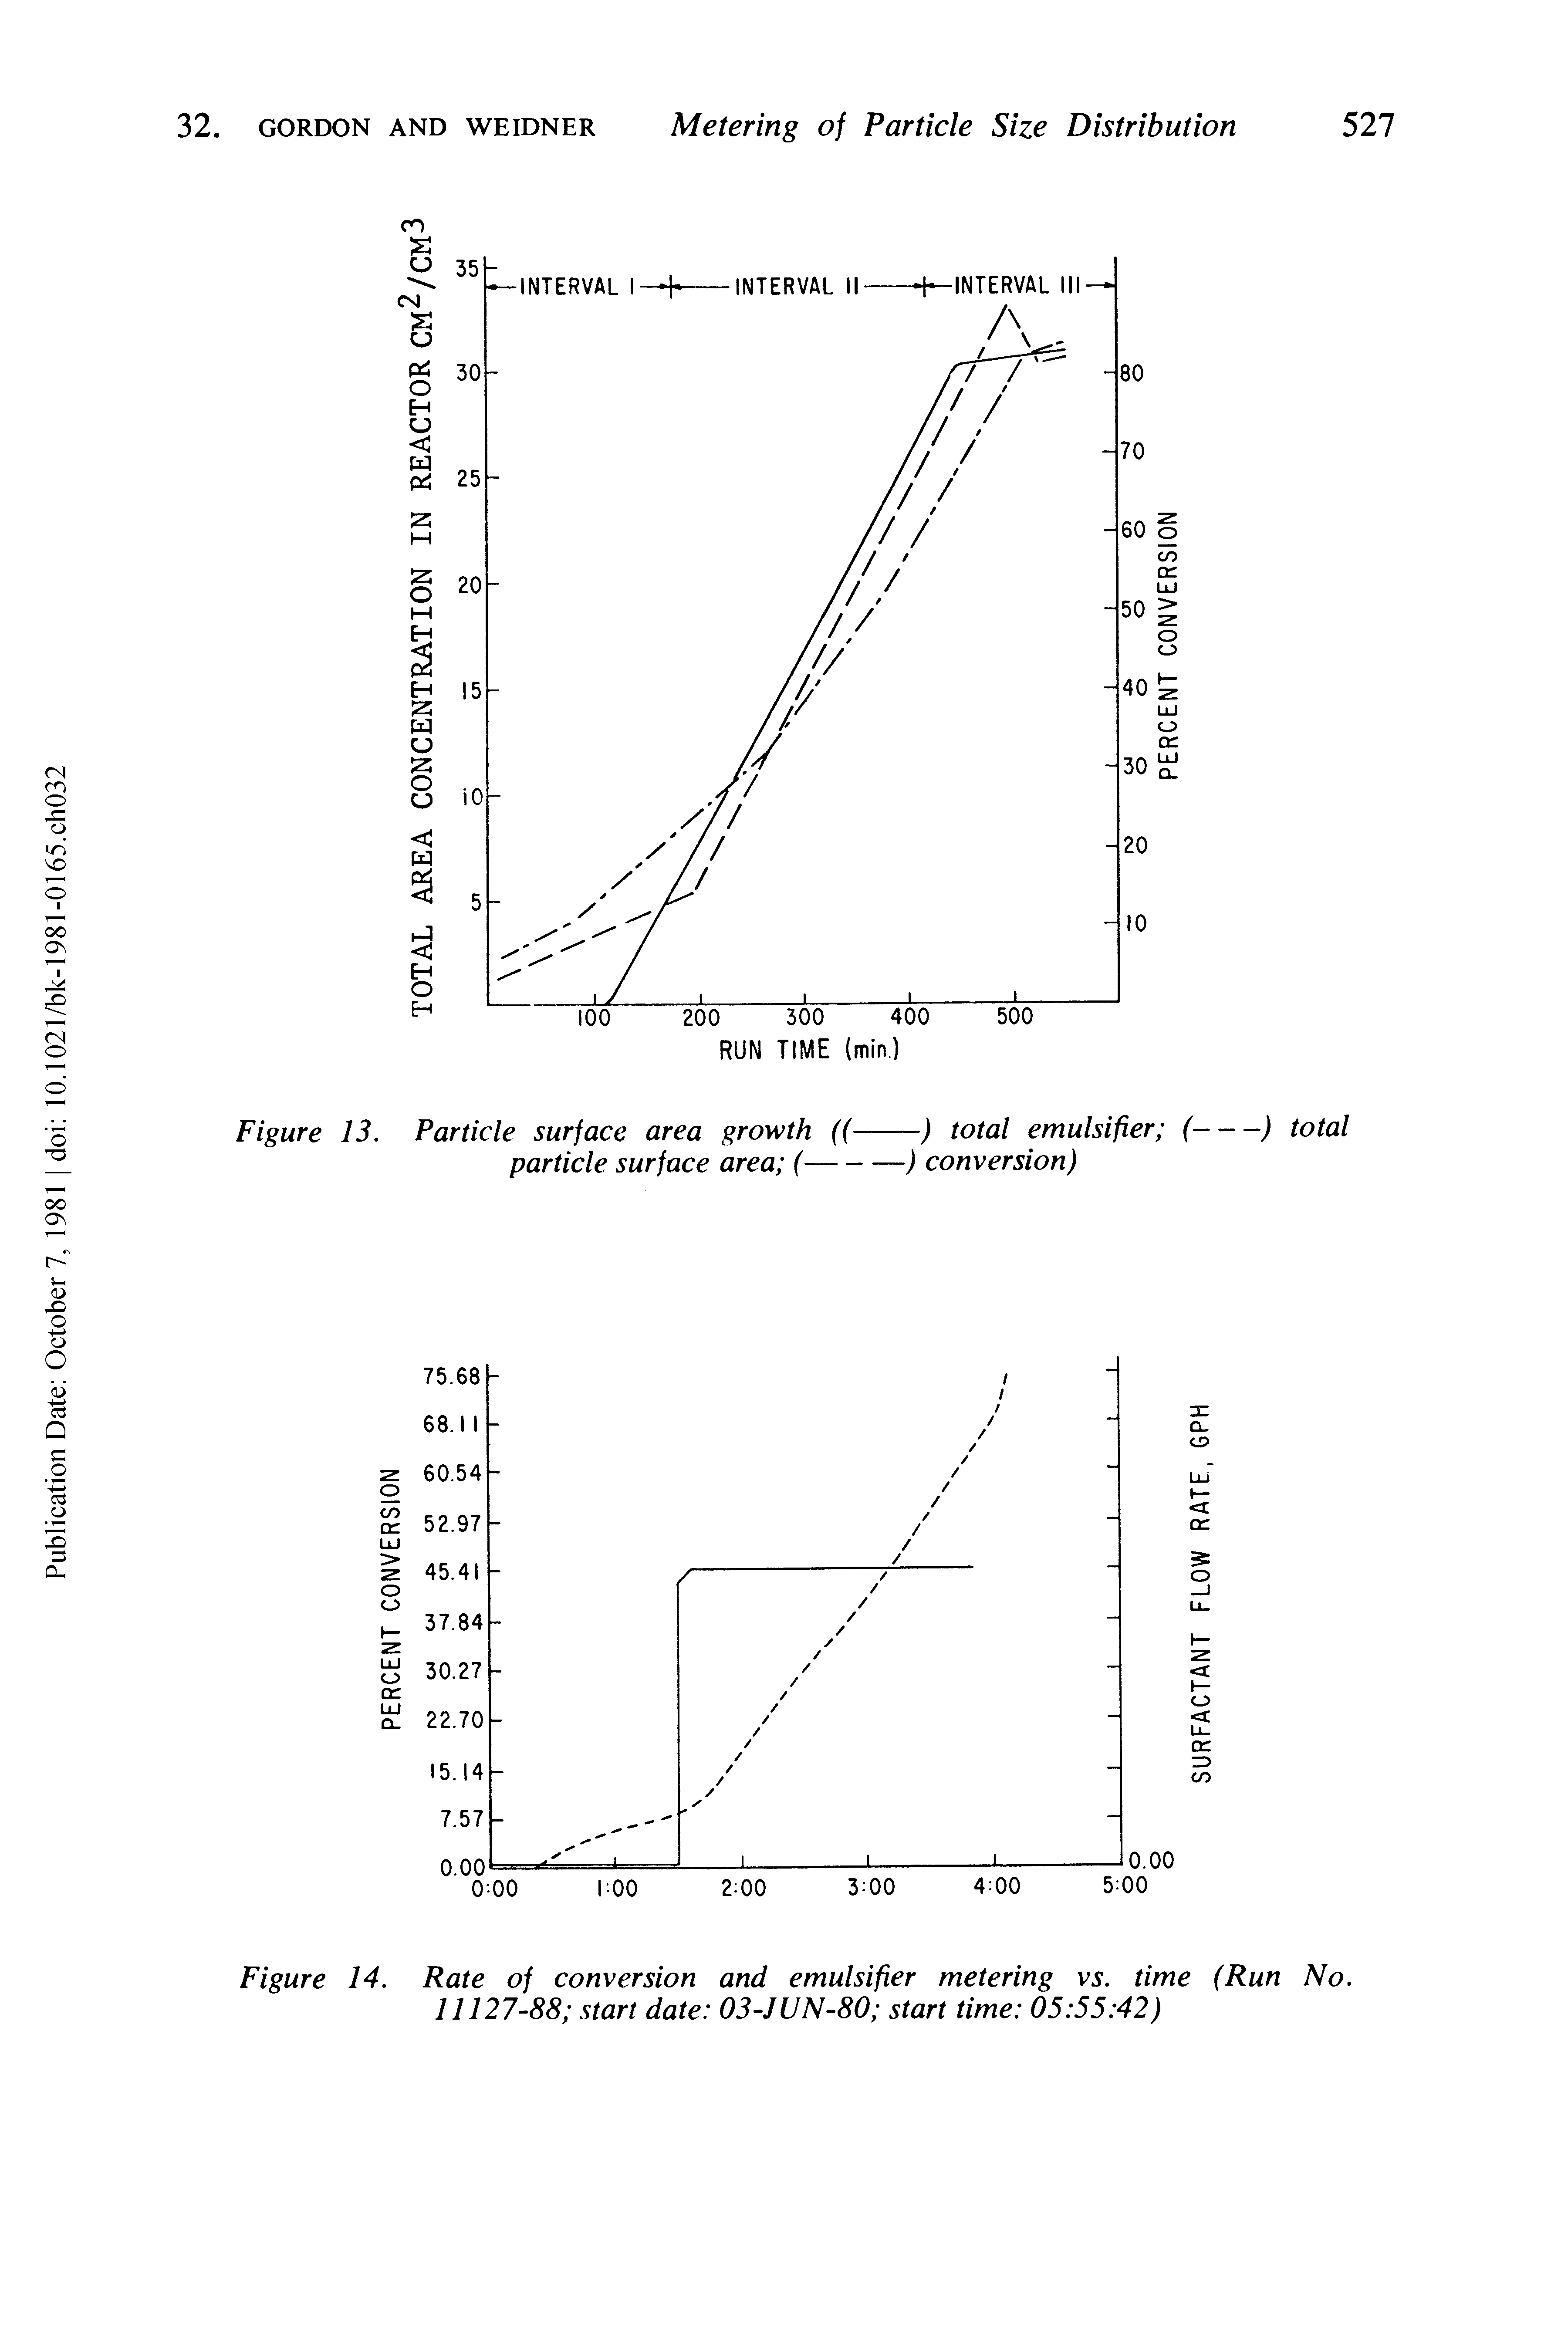 Figure 14. Rate of conversion and emulsifier metering vs. time (Run No. 11127-88 start date 03-JUN-80 start time 05 55 42)...